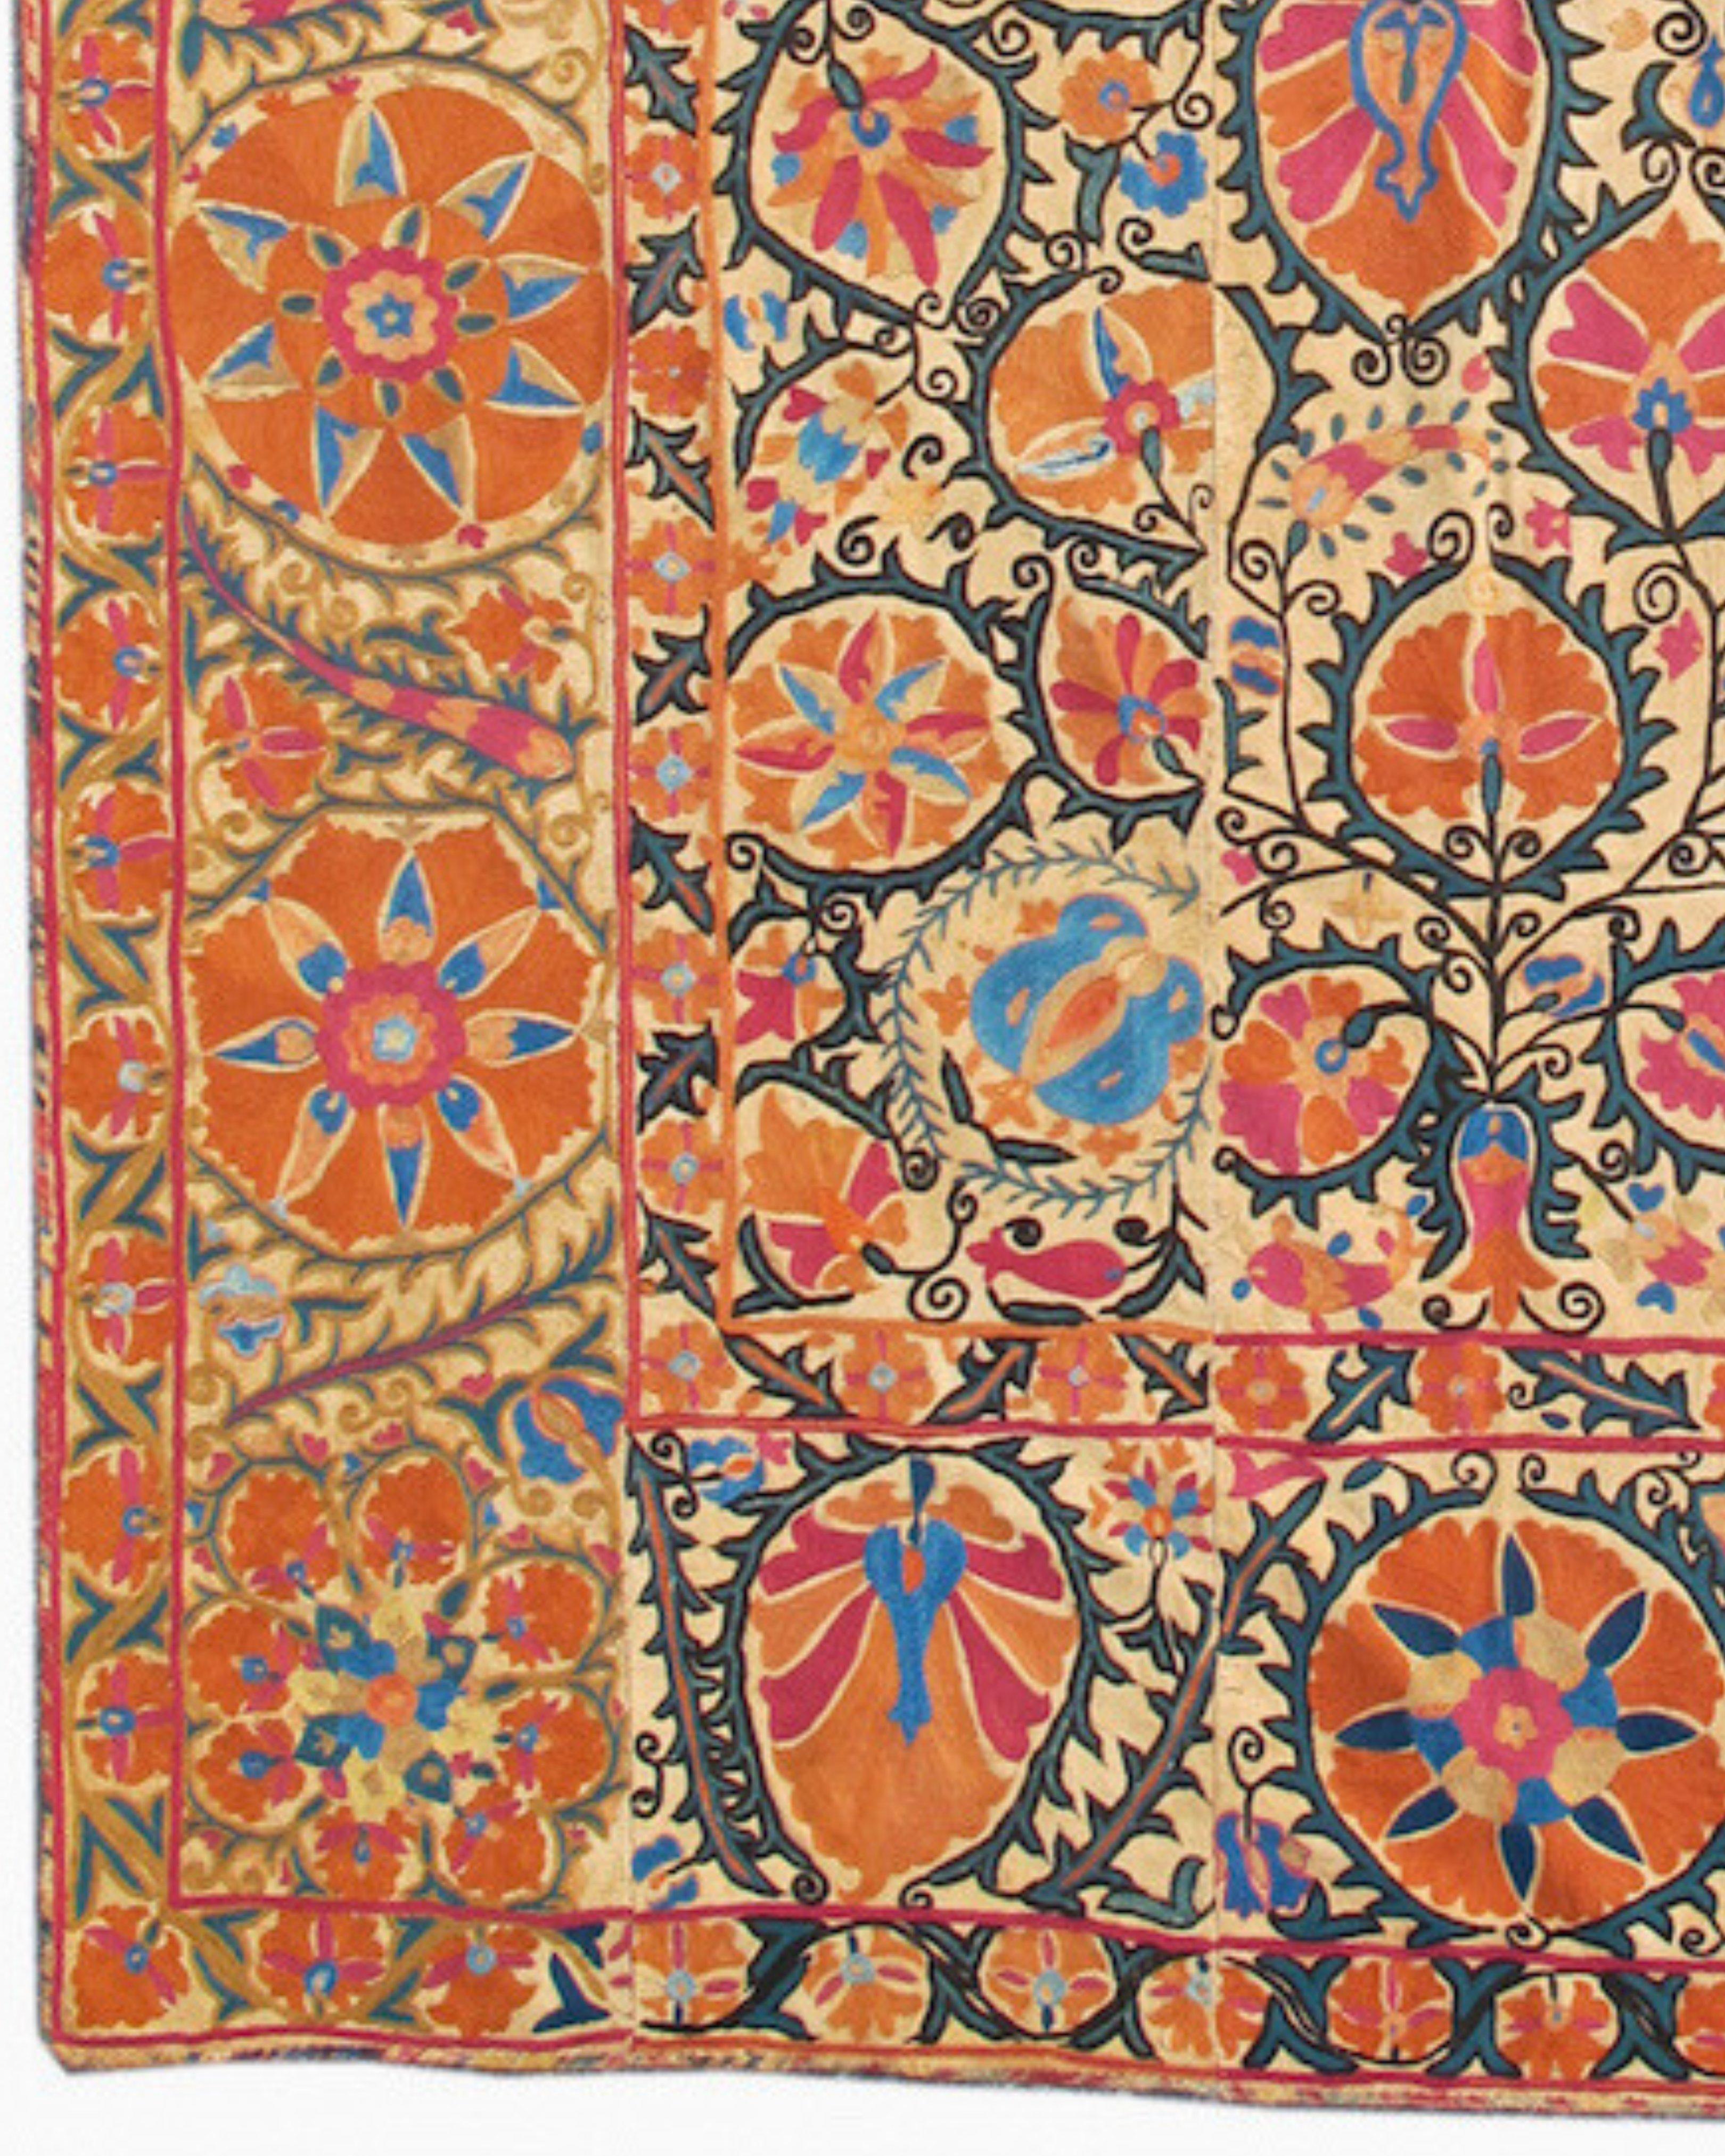 Antique Uzbek Bokhara Suzani Wall-Hanging Tapestry, Mid-19th Century For Sale 1